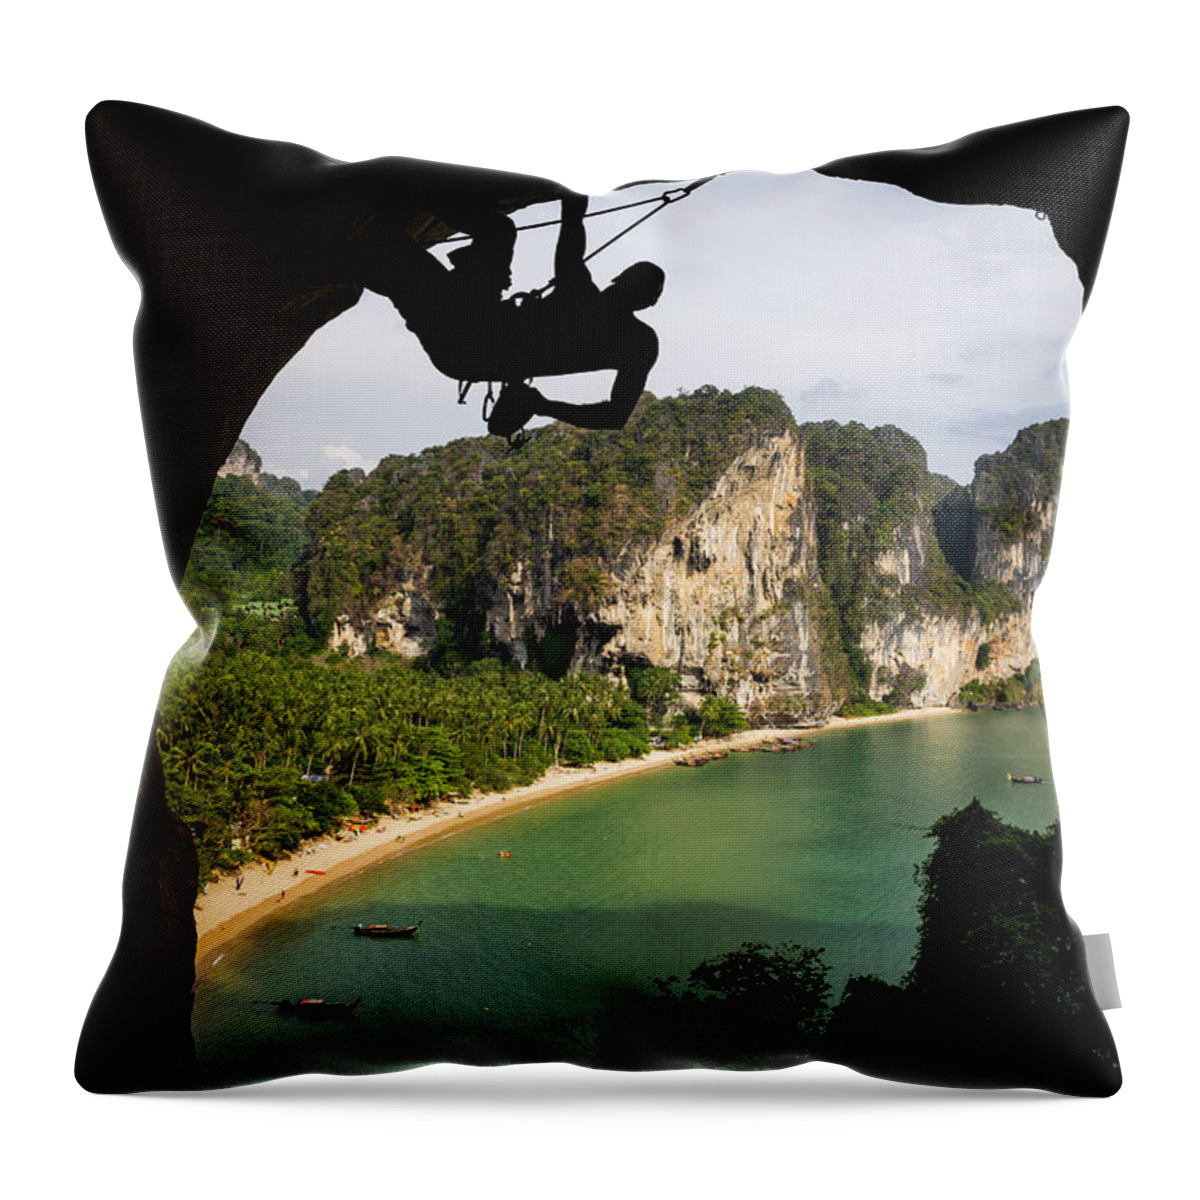 Scenics Throw Pillow featuring the photograph Rock Climbing In Thailand by Tegra Stone Nuess